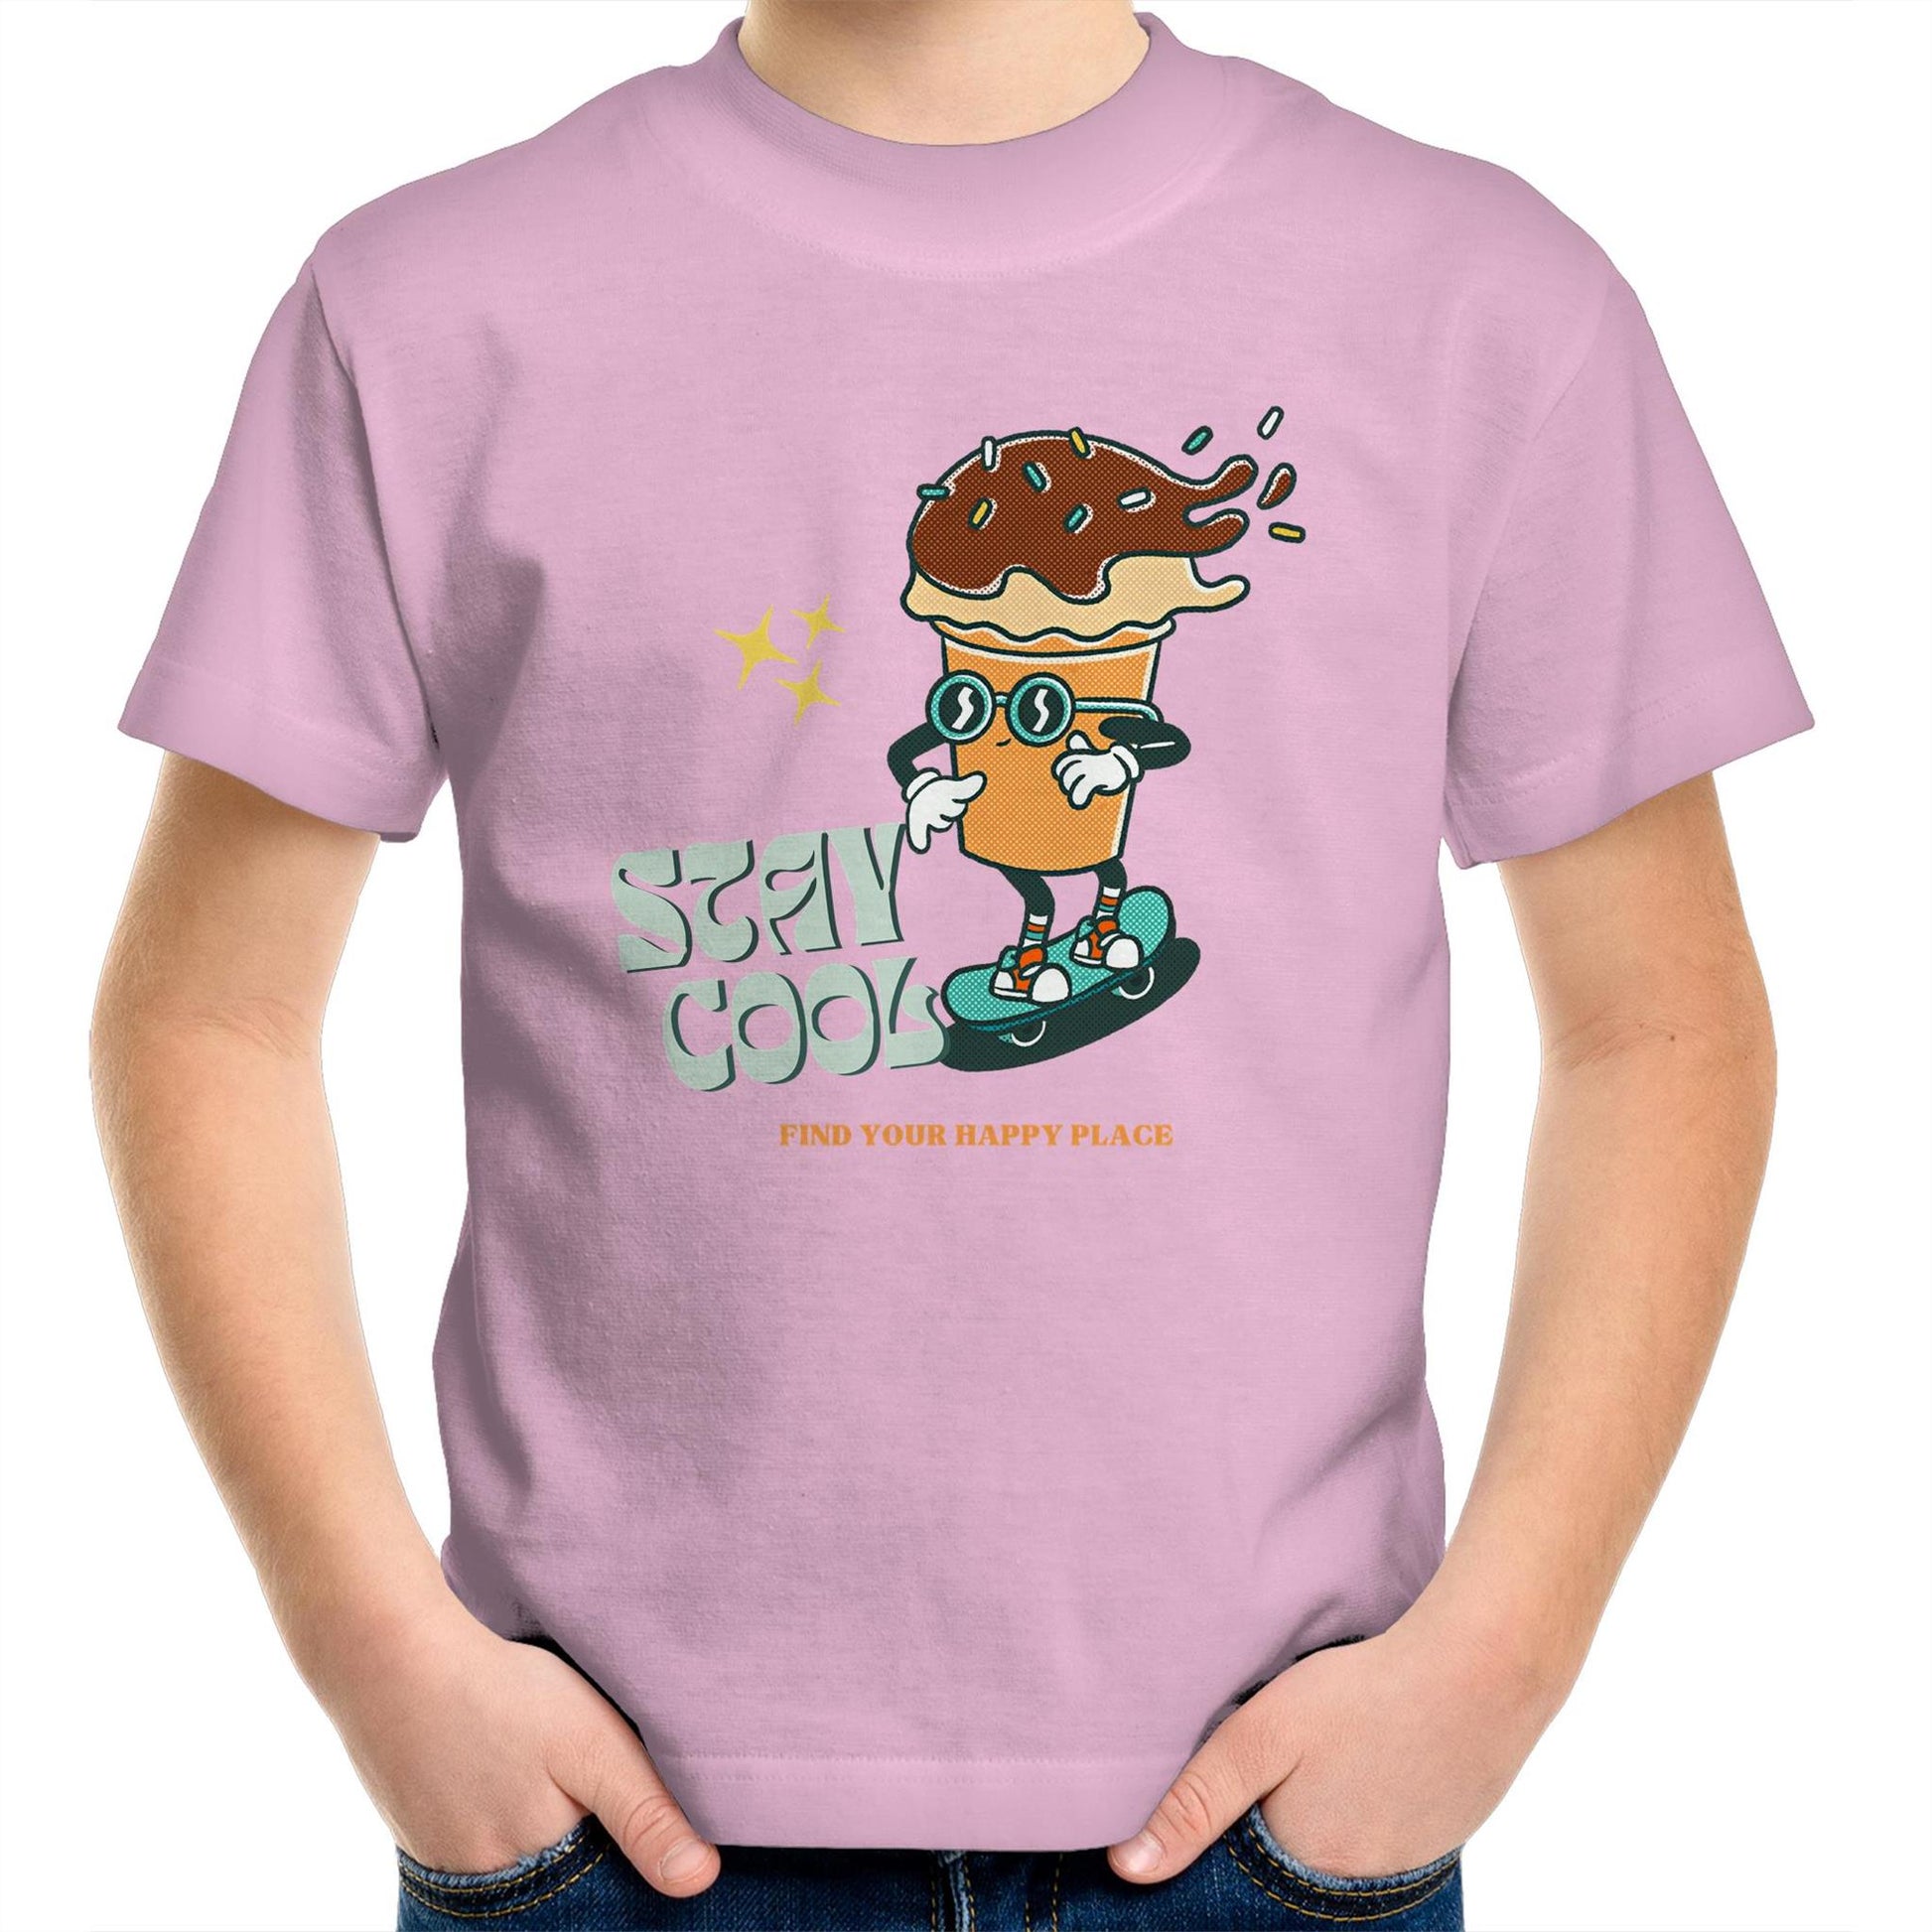 Stay Cool, Find Your Happy Place - Kids Youth Crew T-Shirt Pink Kids Youth T-shirt Retro Summer